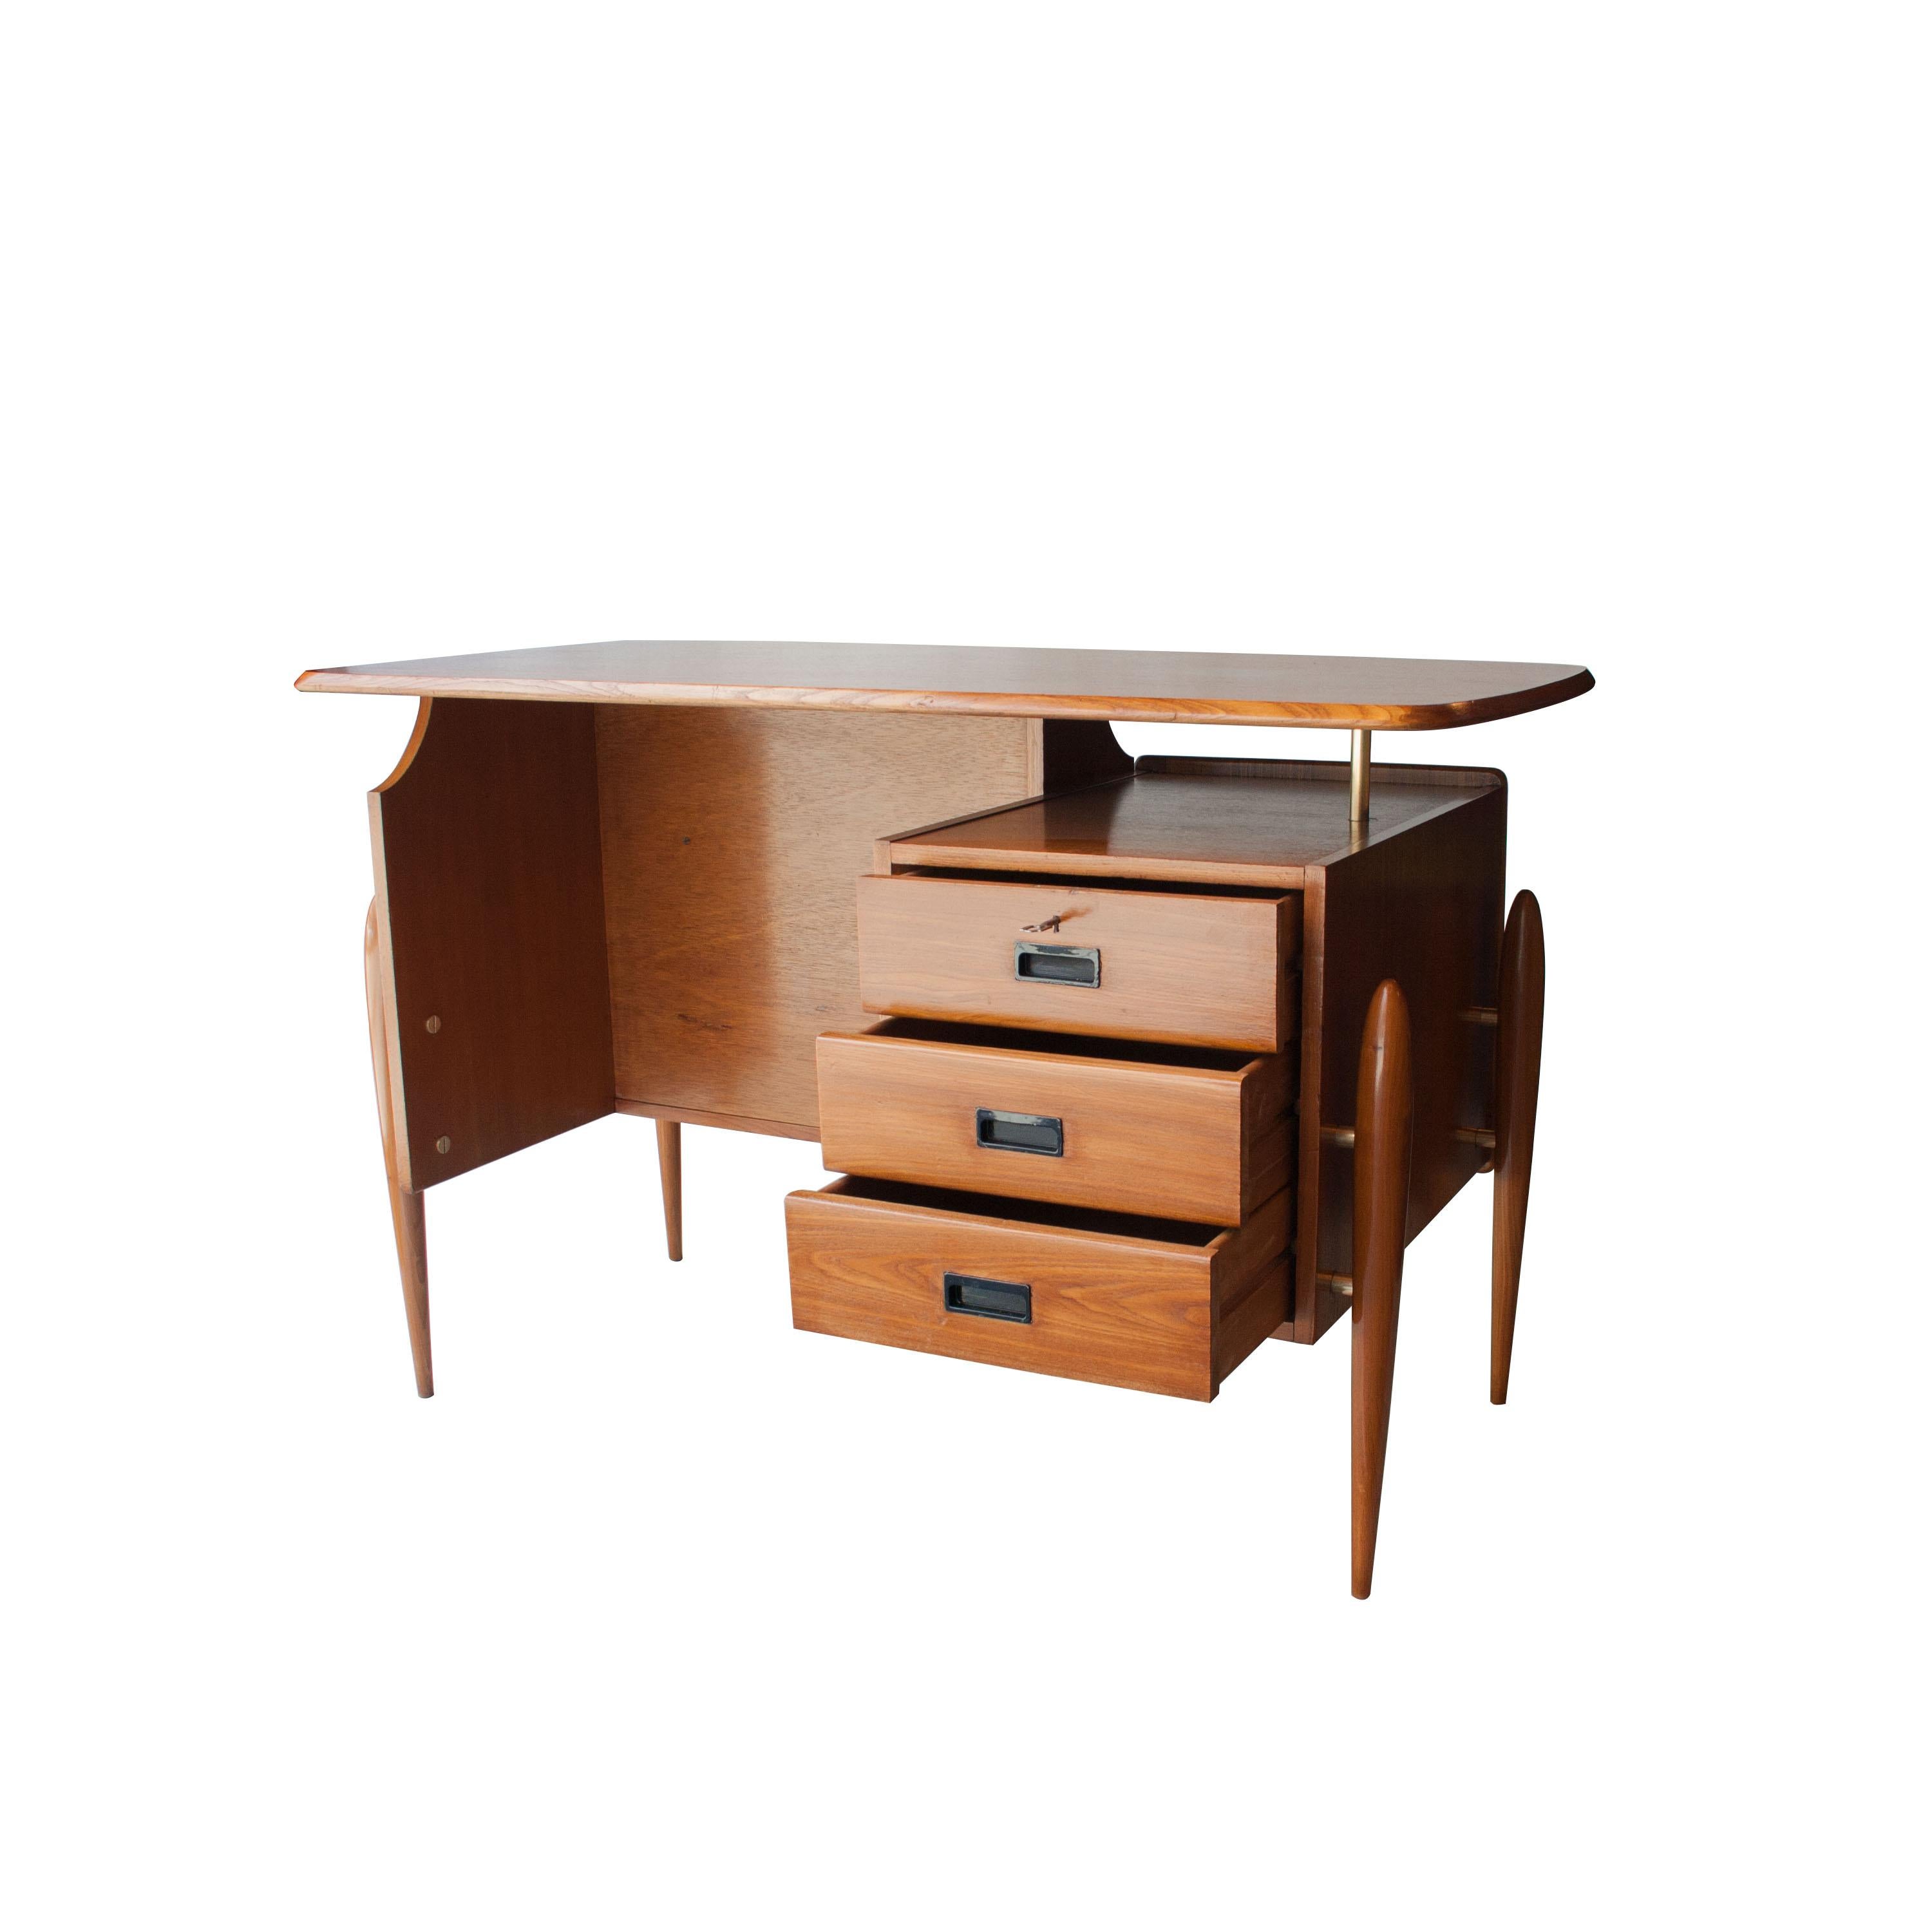 Scandinavian handcrafted desk. Made in solid teak wood carved by hand whit details in brass. Filing cabinet with three drawers.